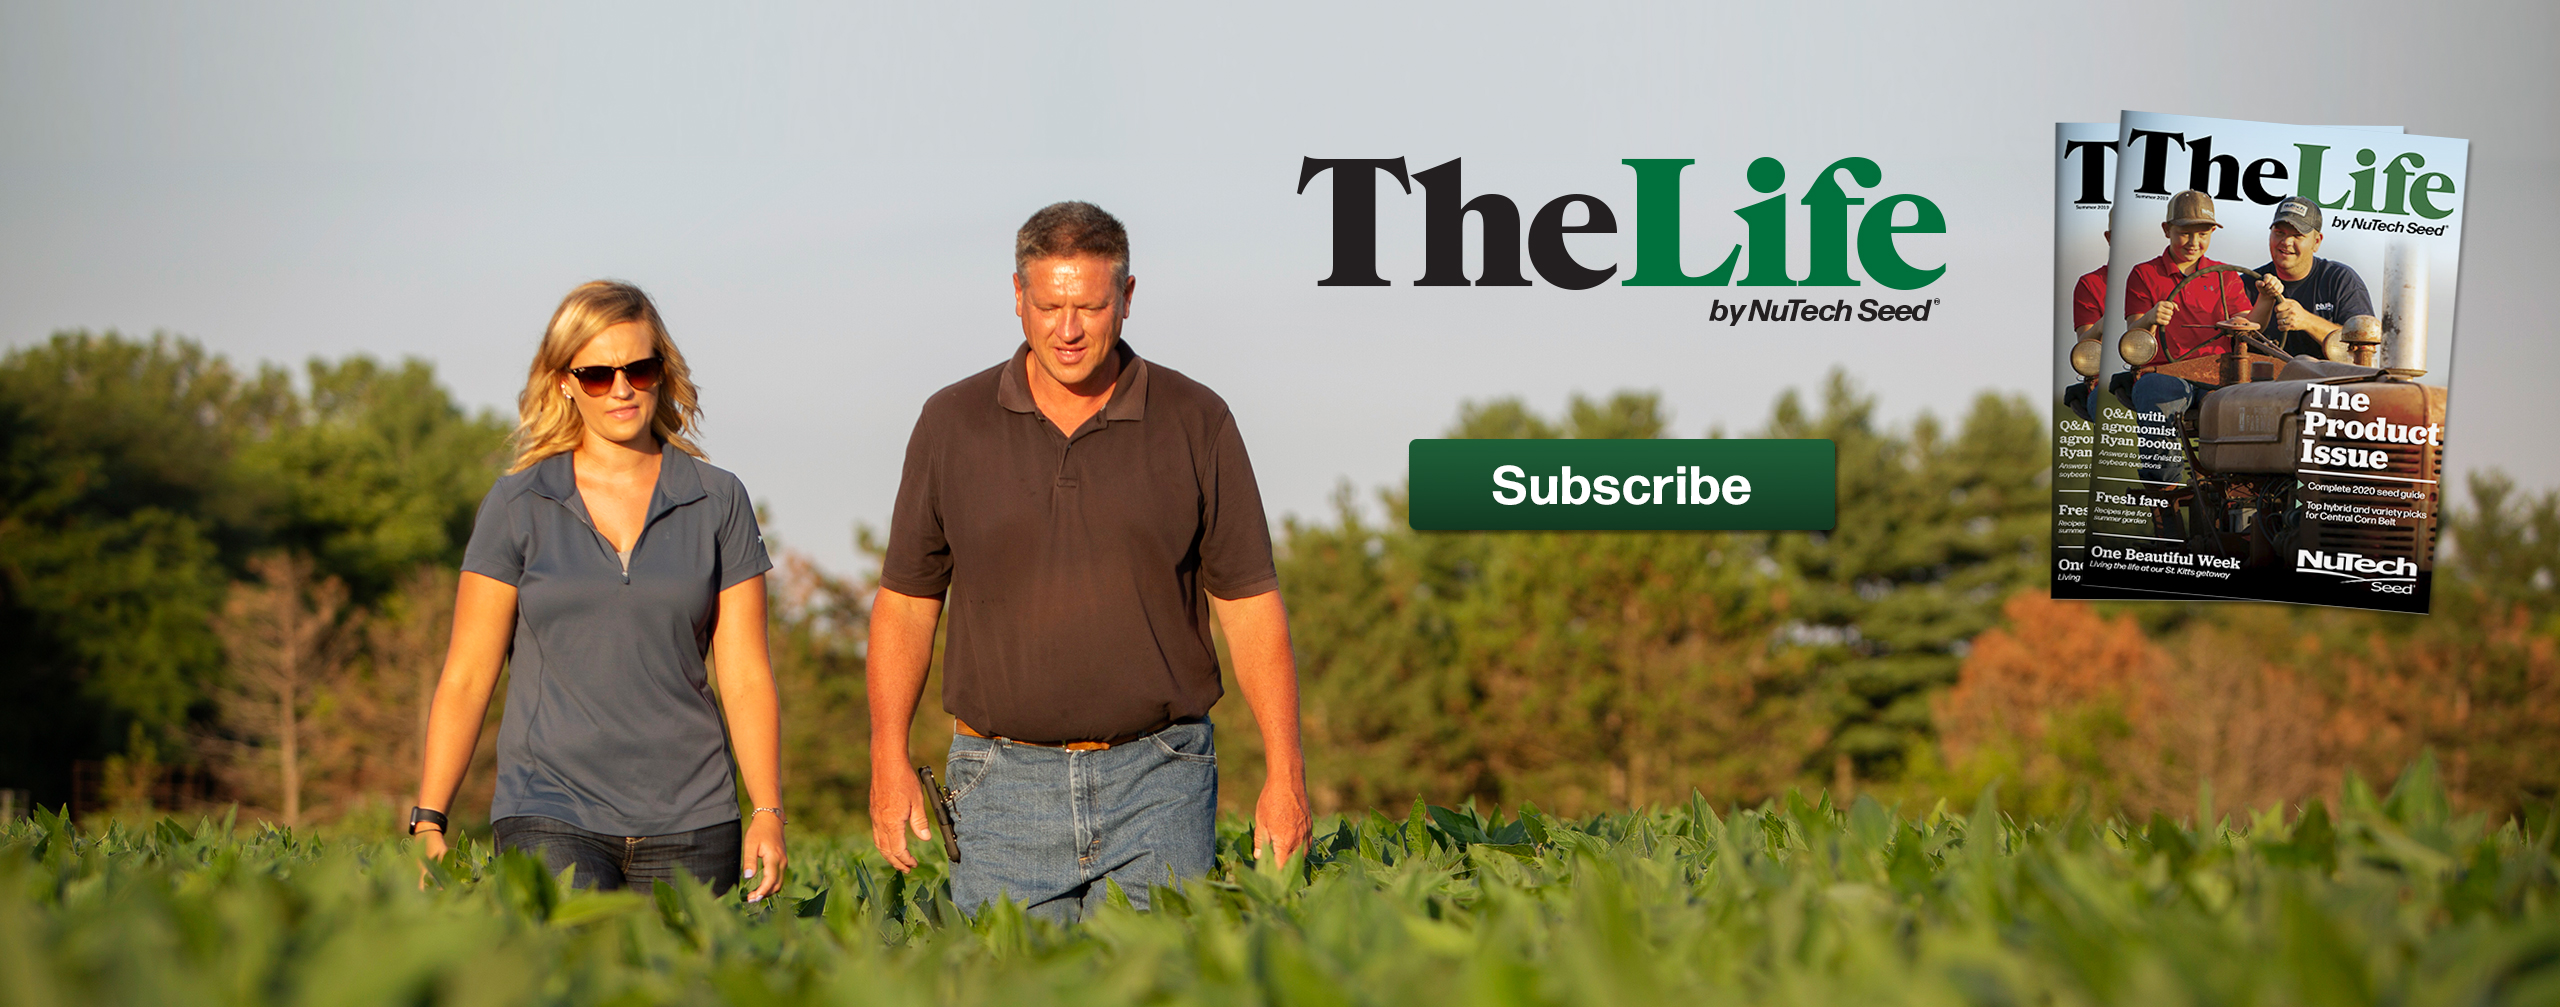 The Life Magazine Subscribe